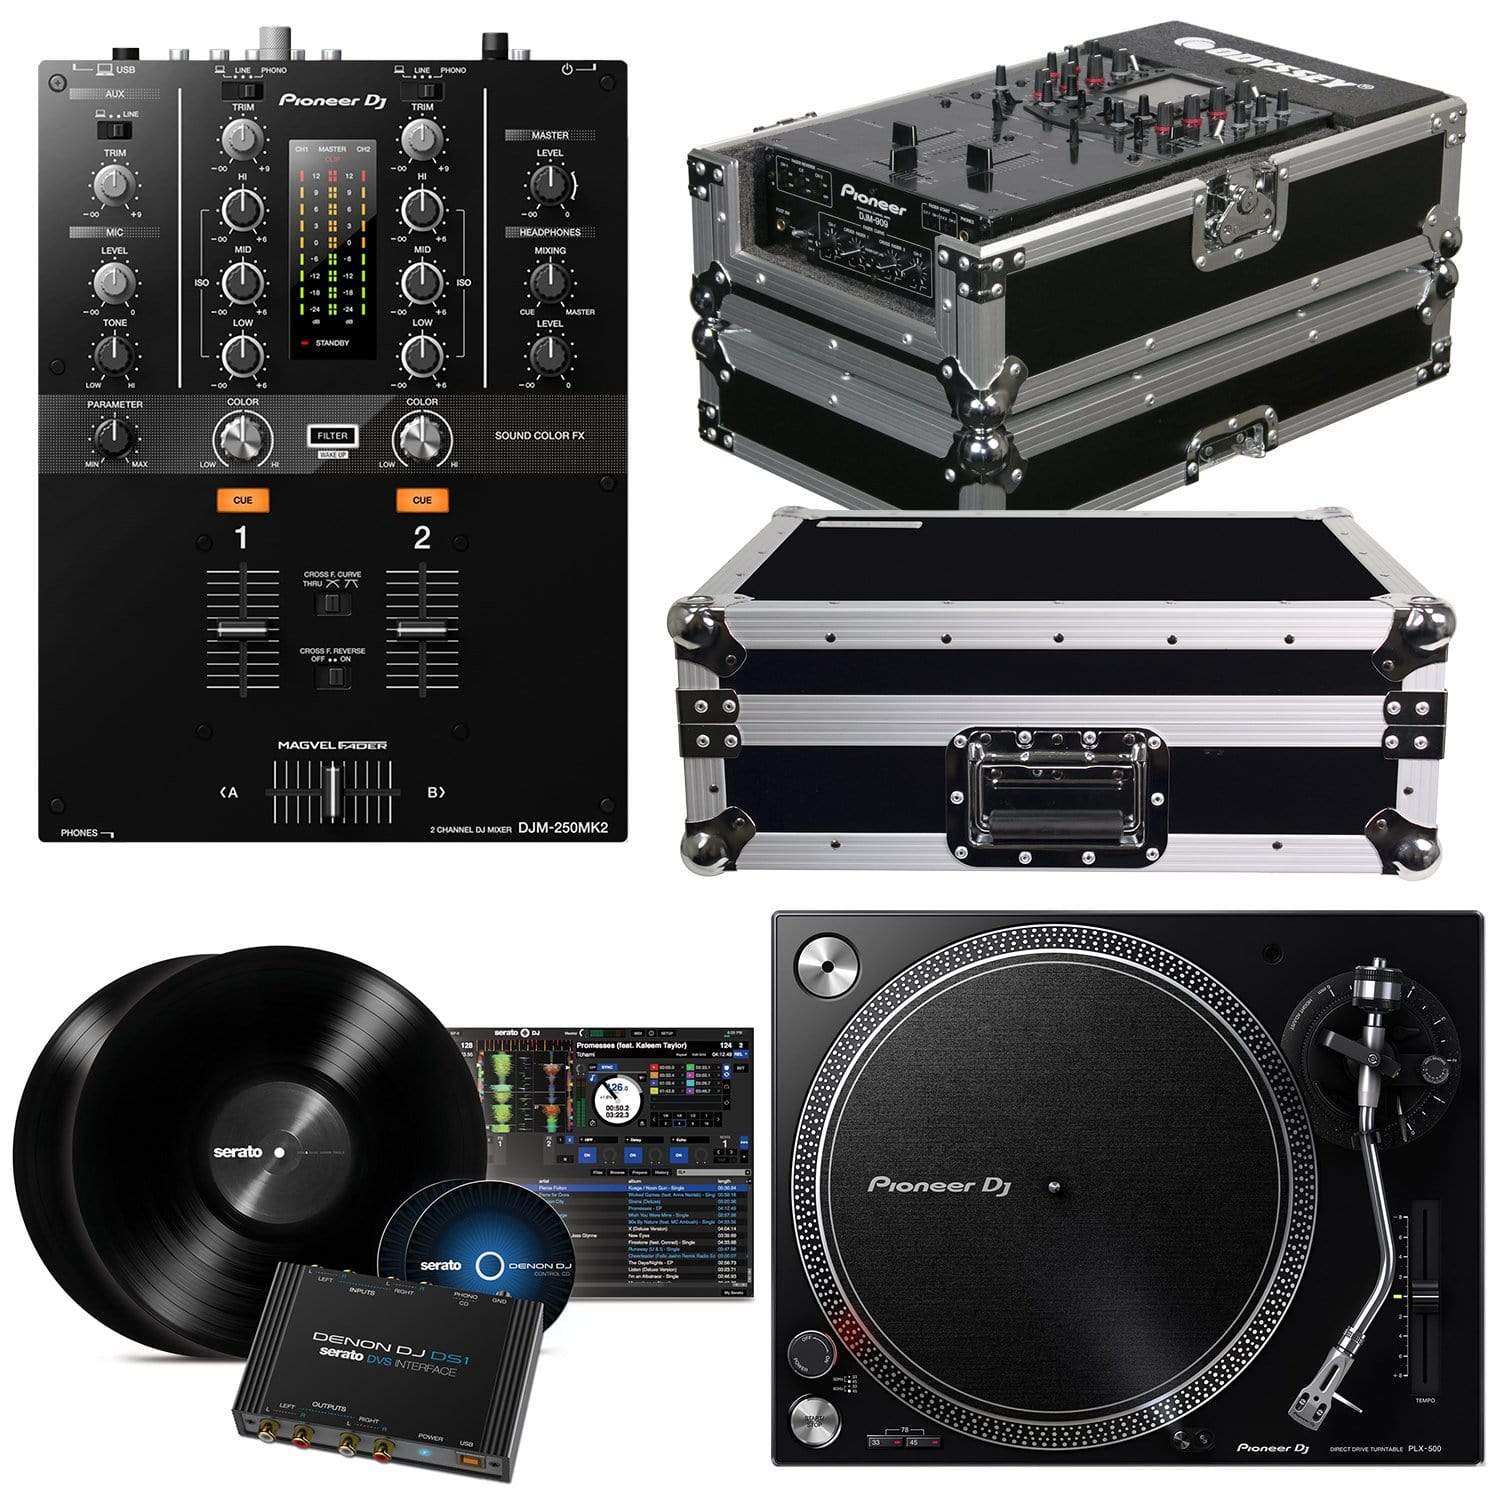 Pioneer DJ DJMMK2 DJ Mixer with PLXK Turntable and Denon